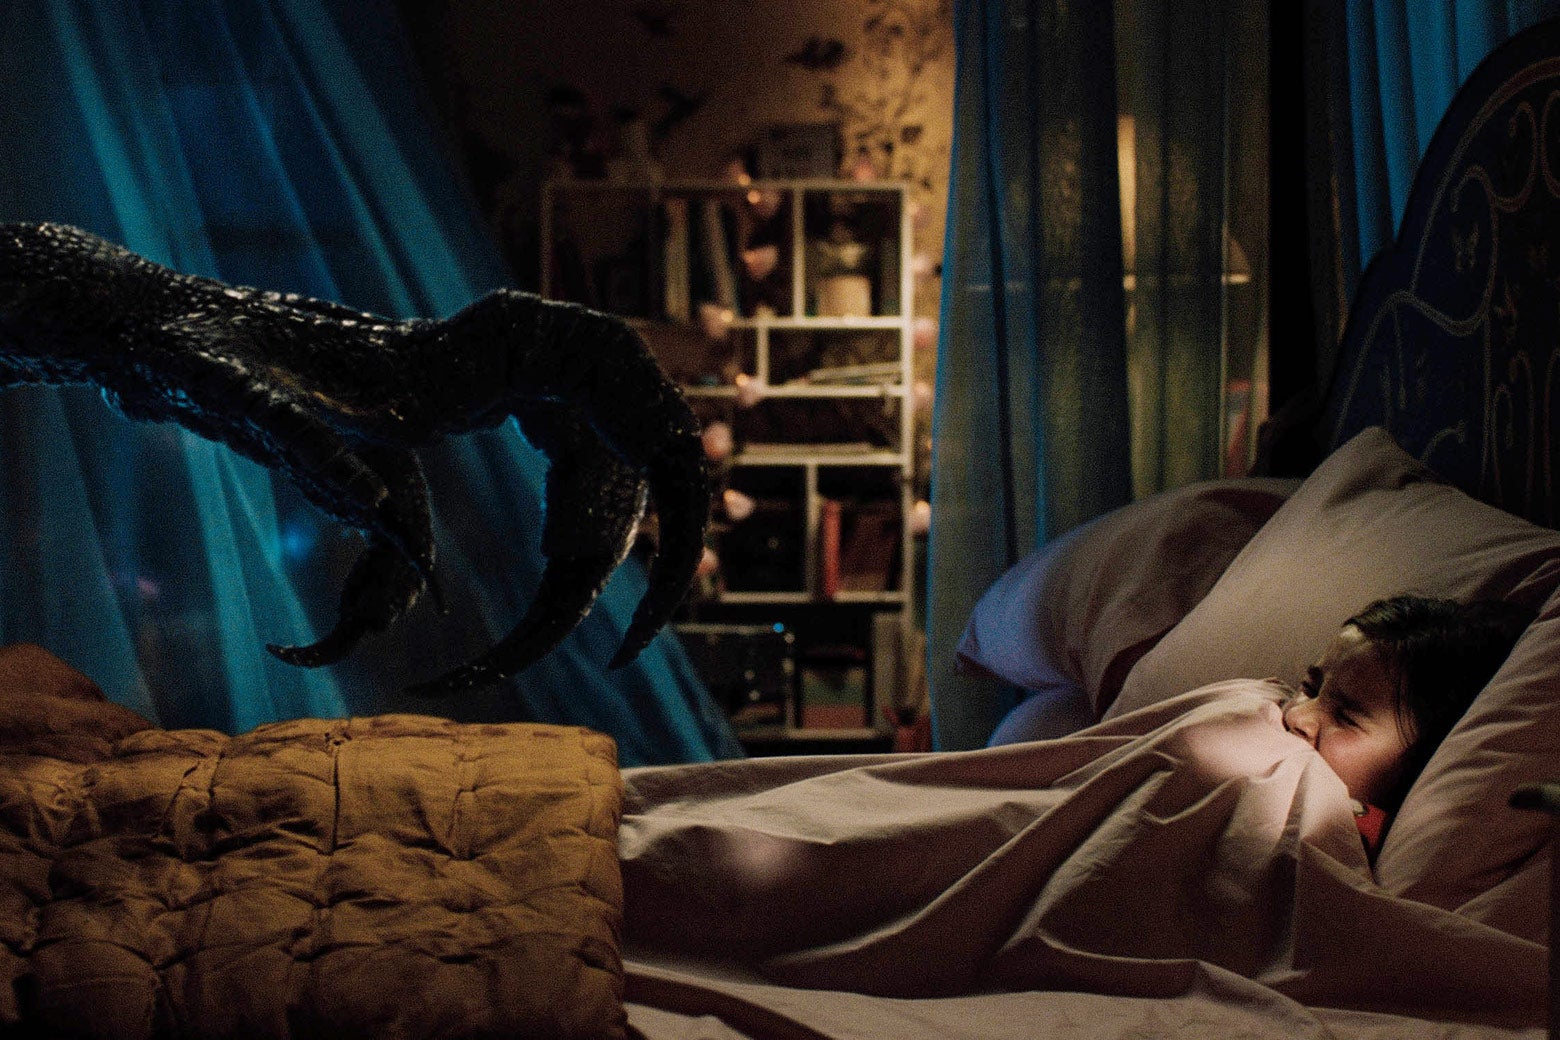 A scaly dinosaur claw reaches toward a child in a bed.